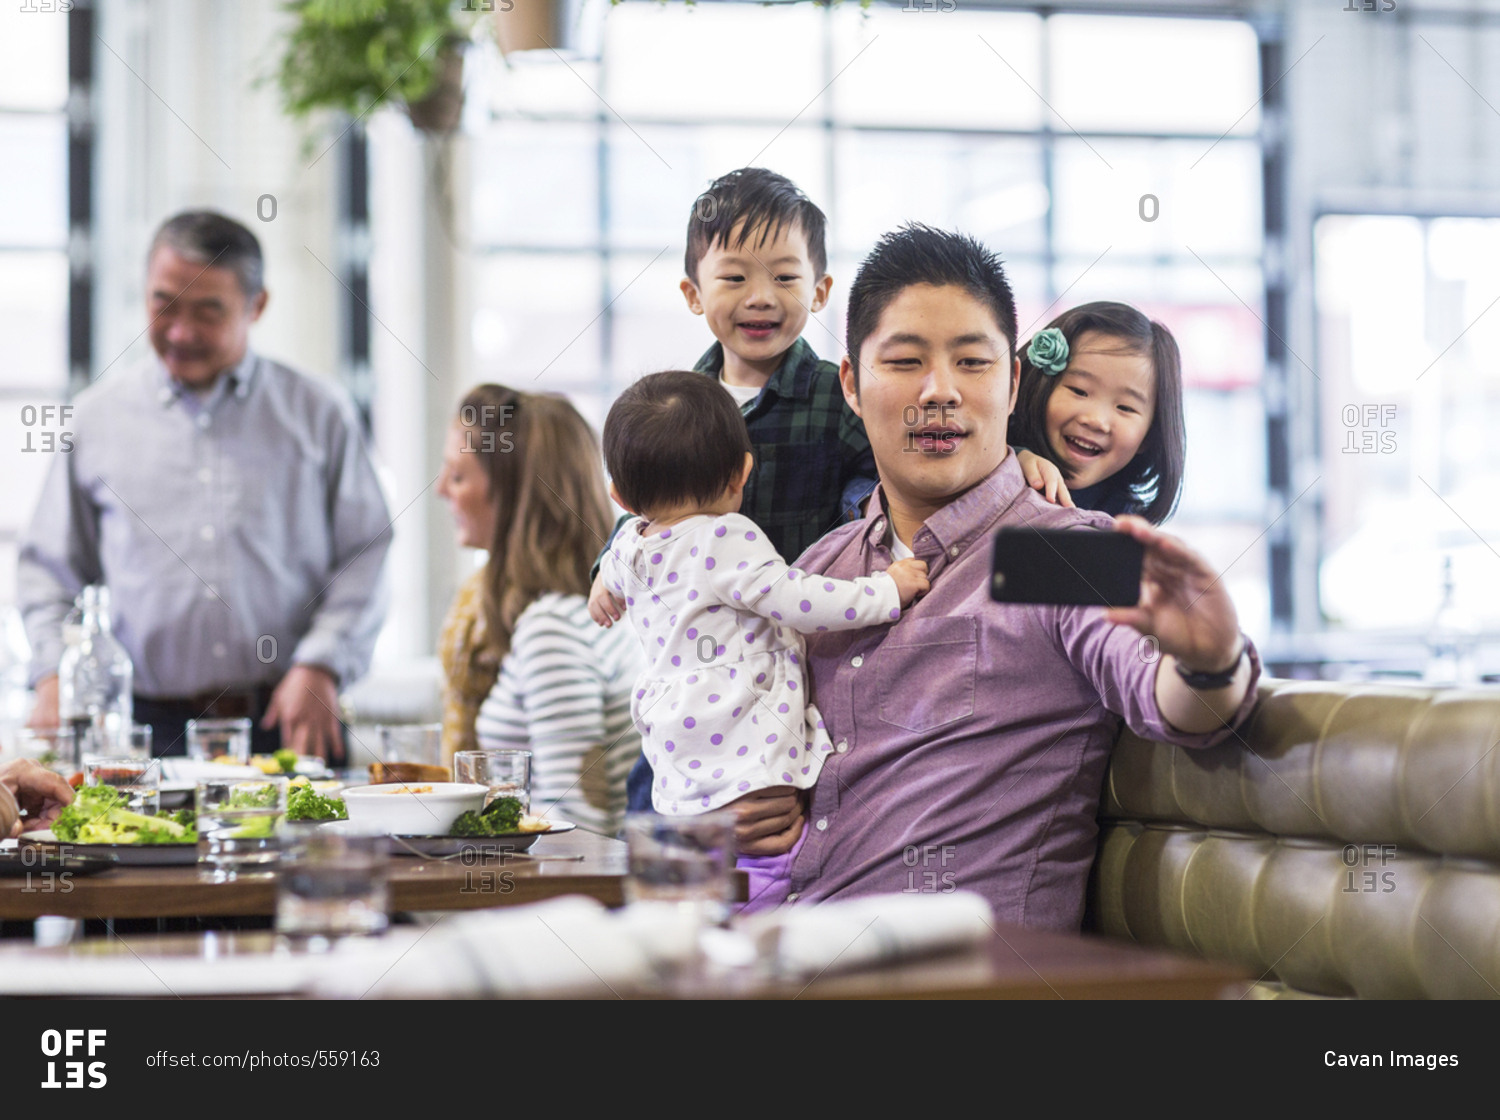 Father taking selfie with children while sitting with family in restaurant